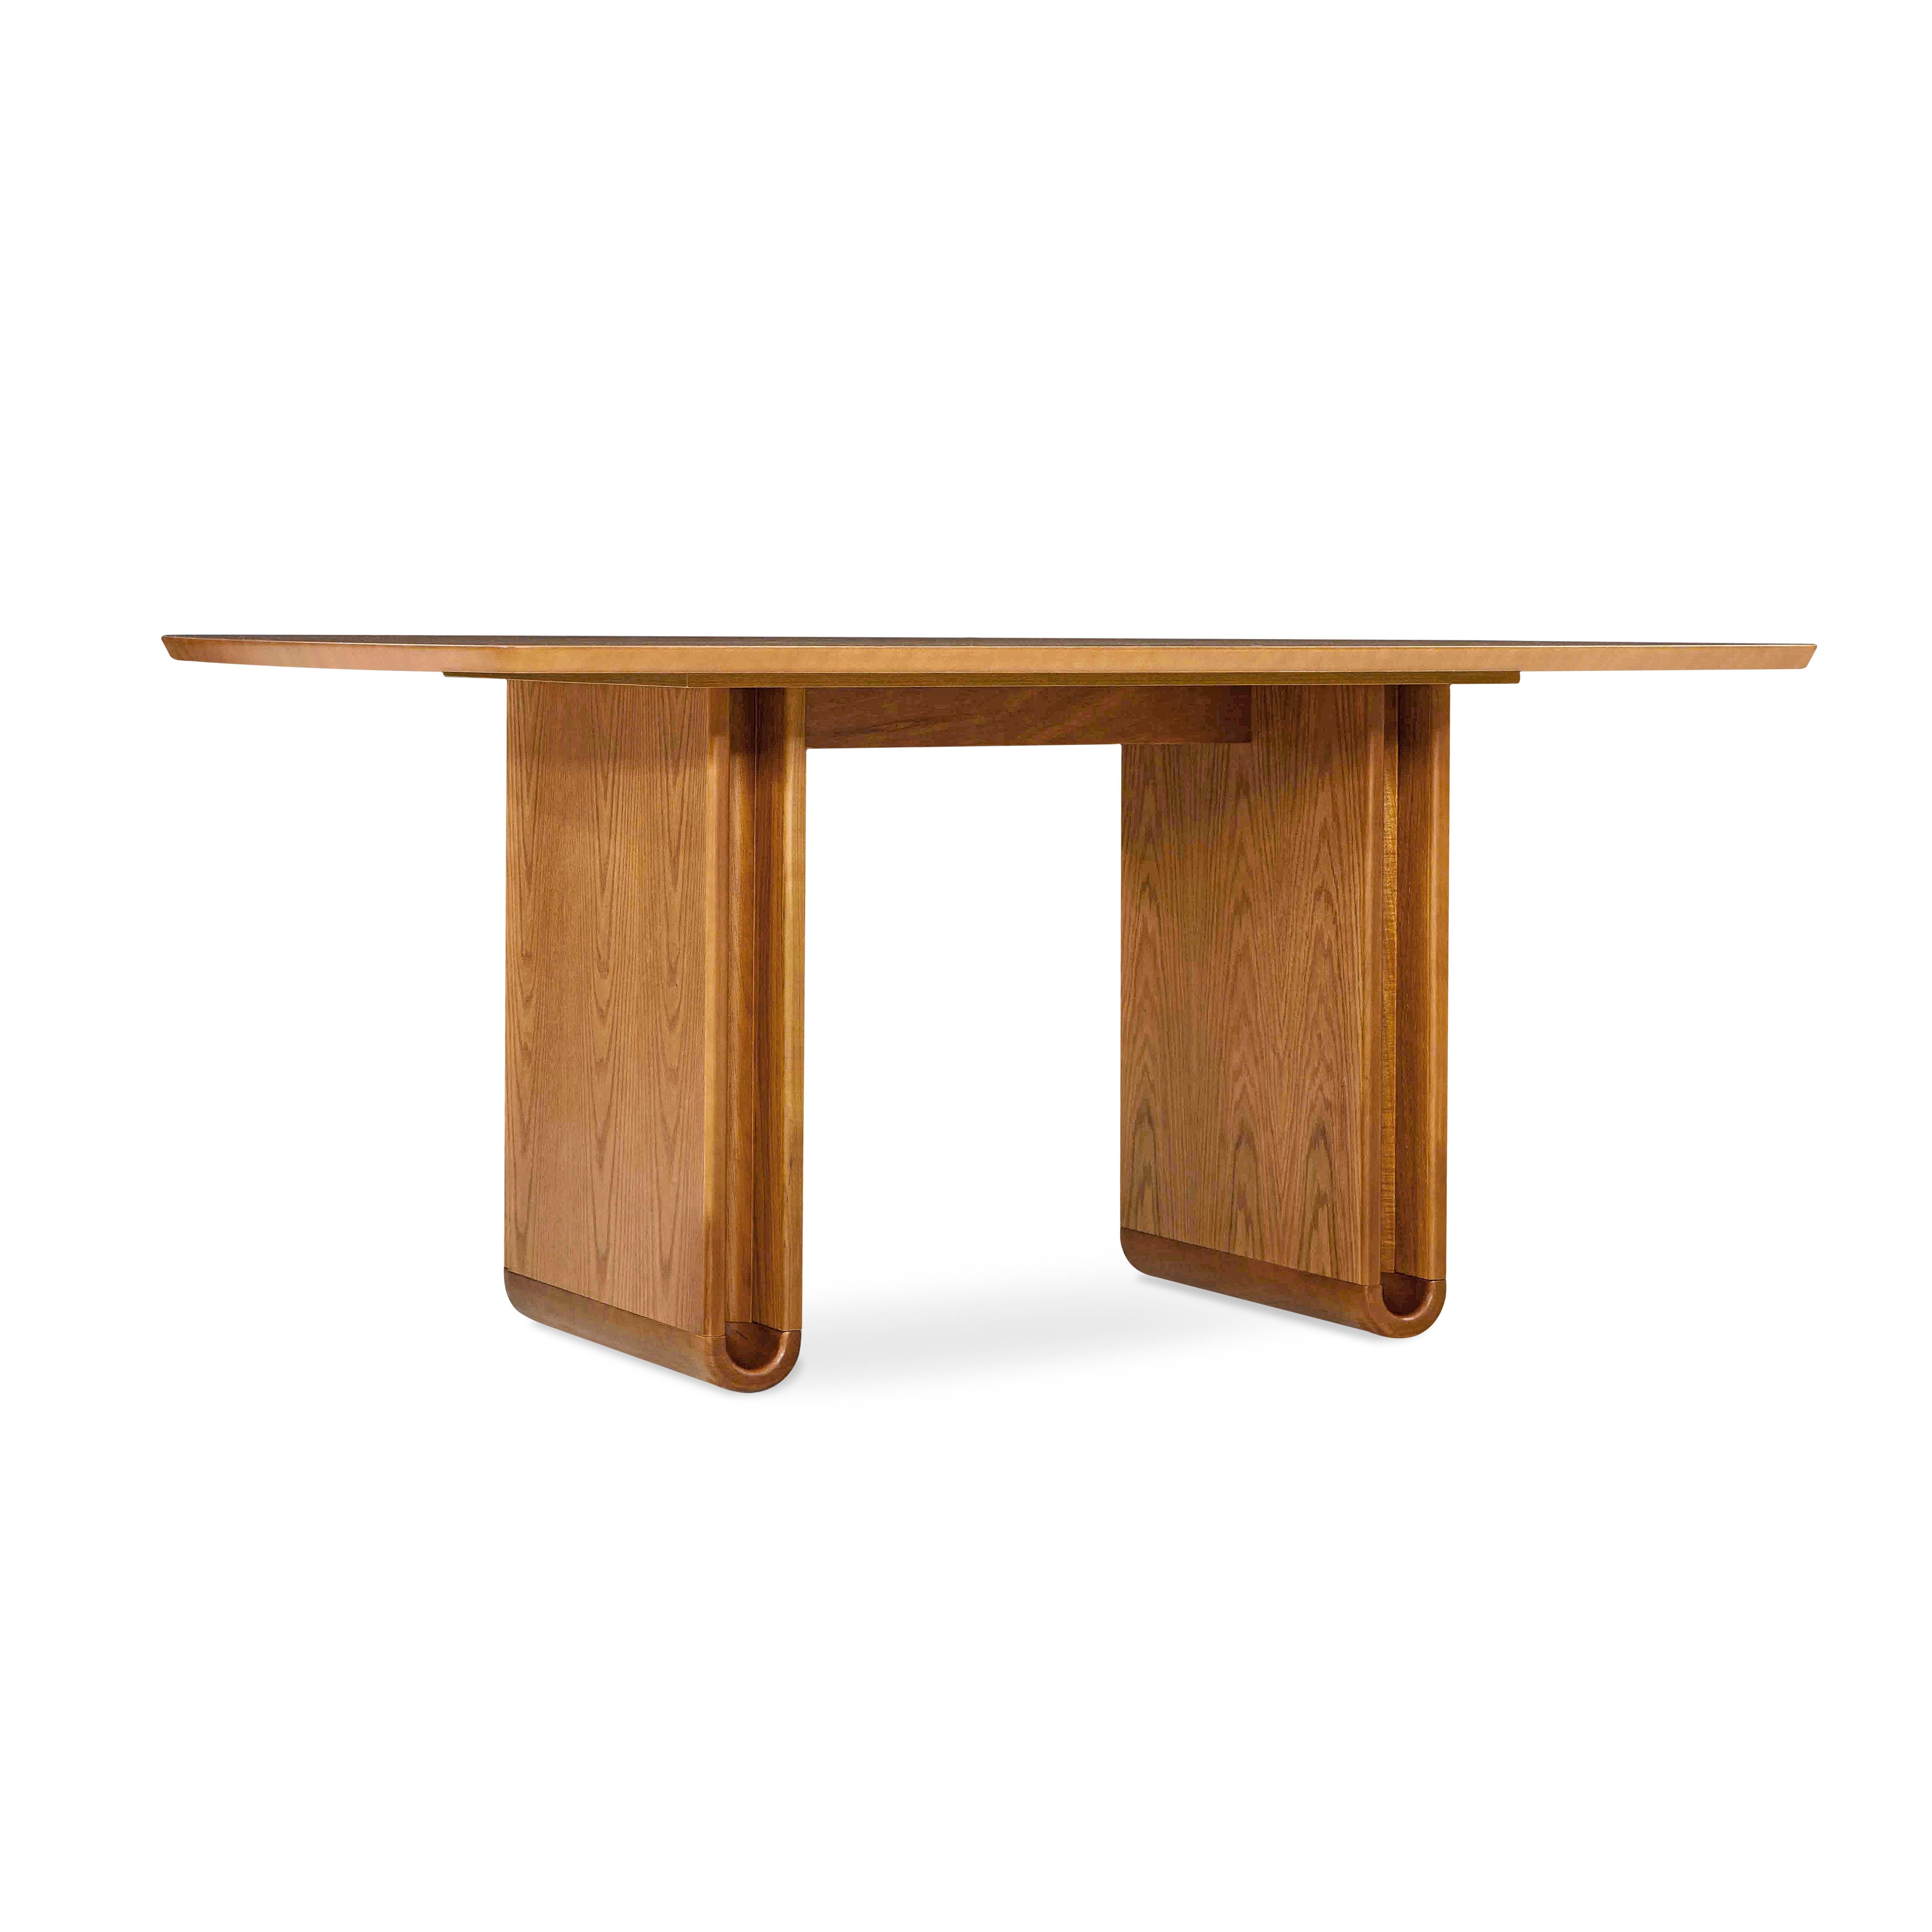 The refined shapes of the Neon dining table in oak make it a uniquely shaped addition to your dining room. It is a sophisticated table for a modern contemporary or minimalist decor with symmetrical proportions along with the curved detail of the